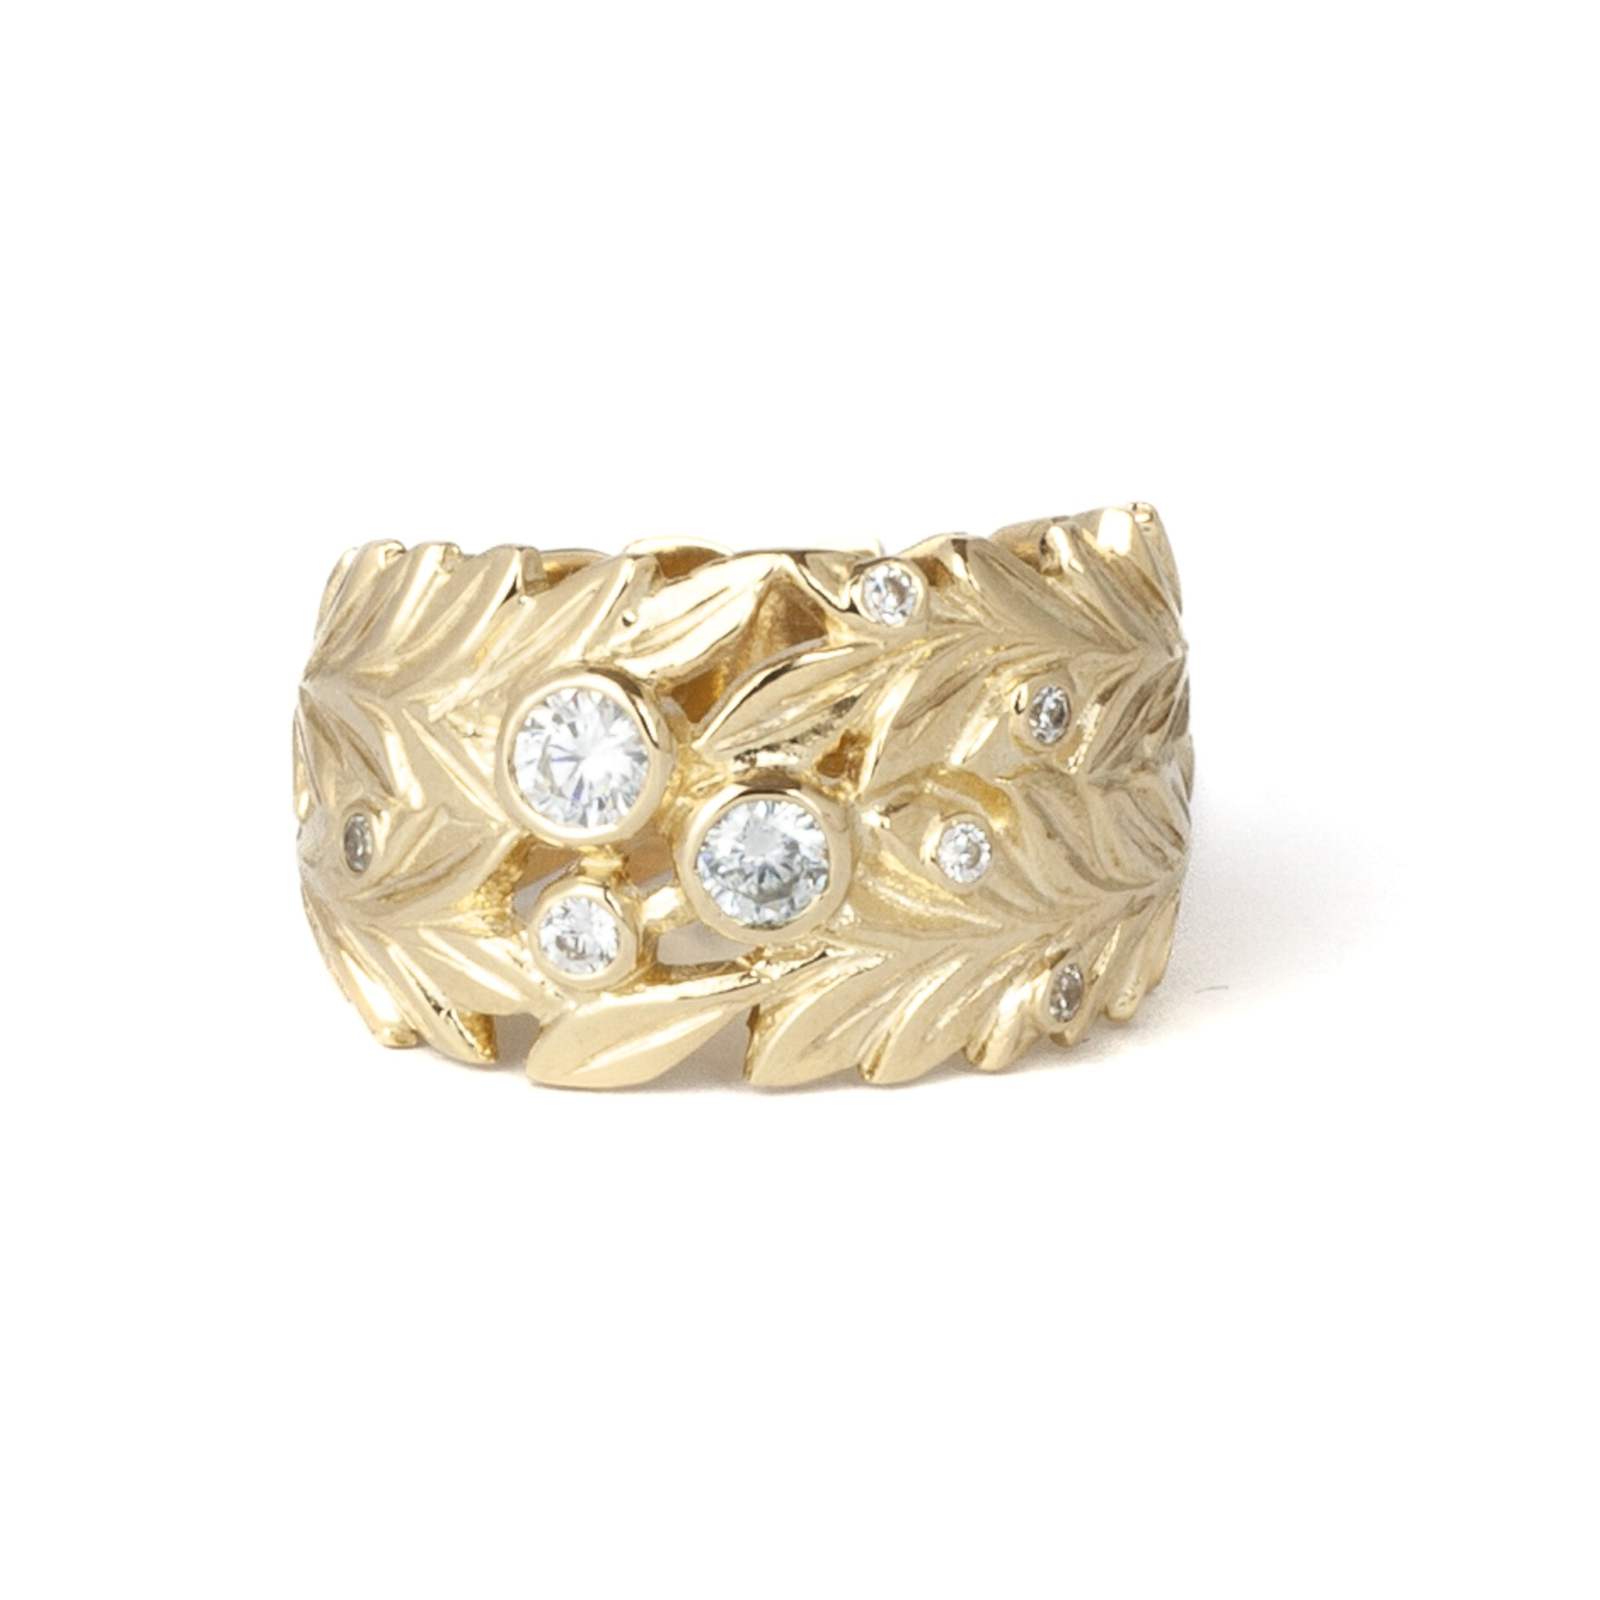 Wide Band Diamond Ring With Laurel Leaves